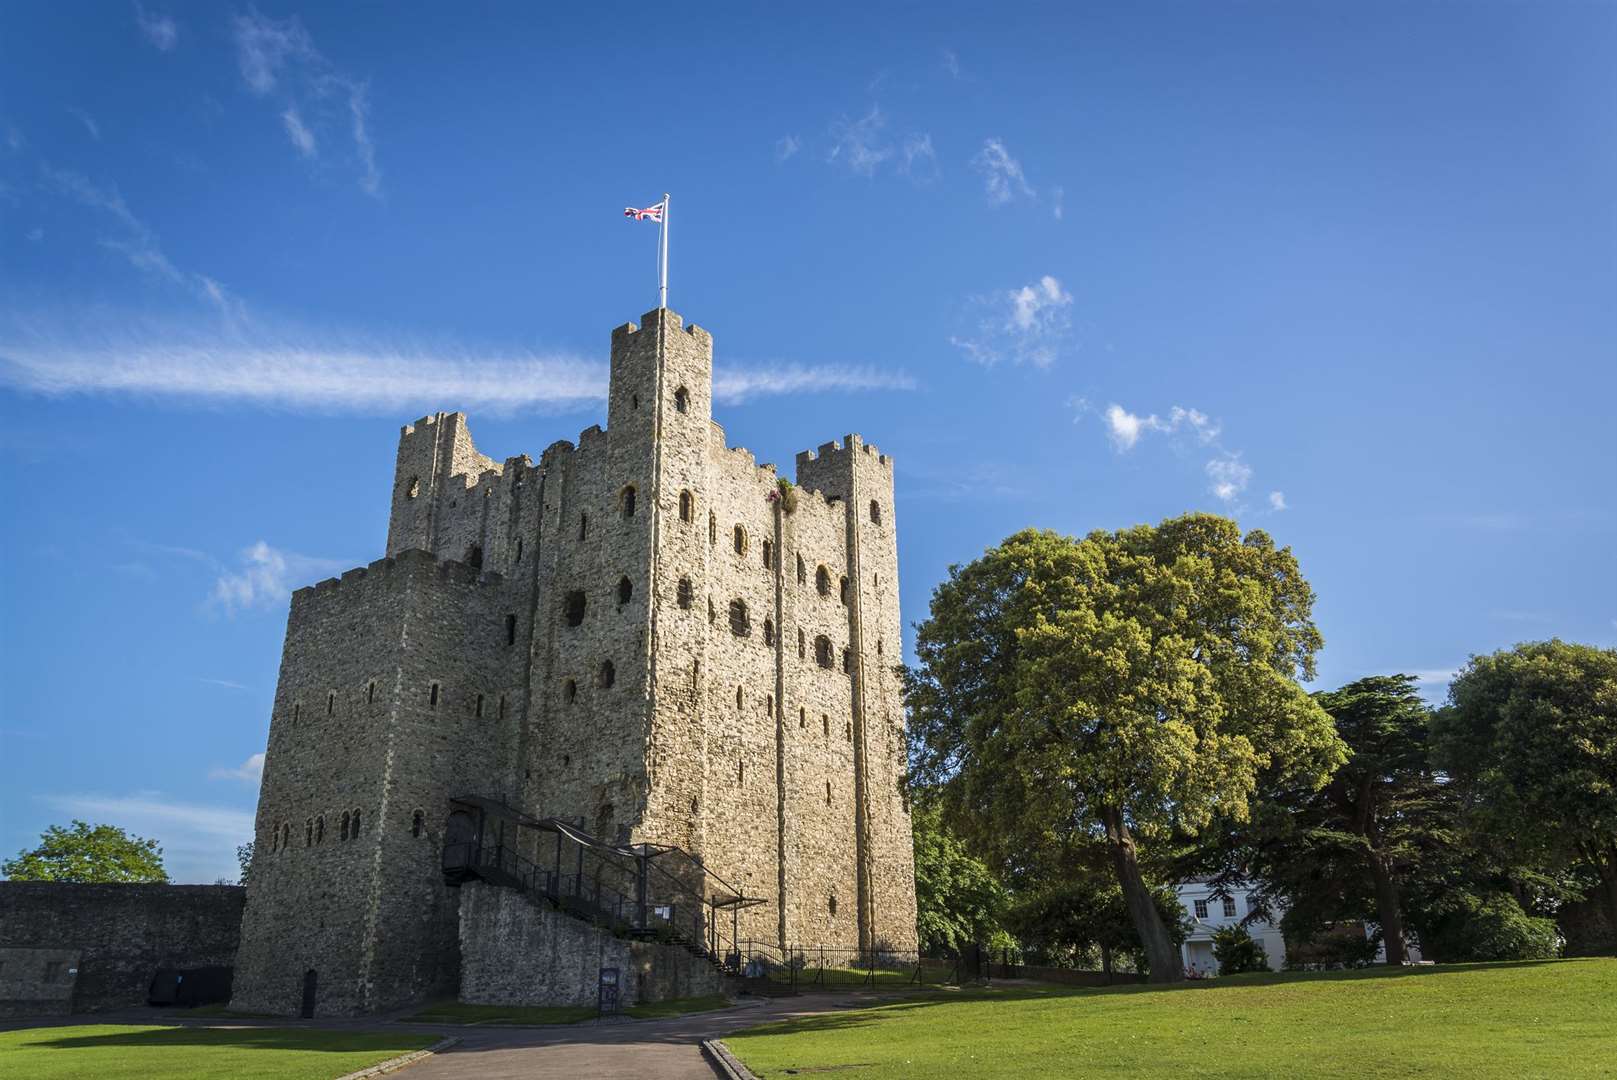 Rochester Castle - the 12th-century keep or stone tower is one of the best preserved in England